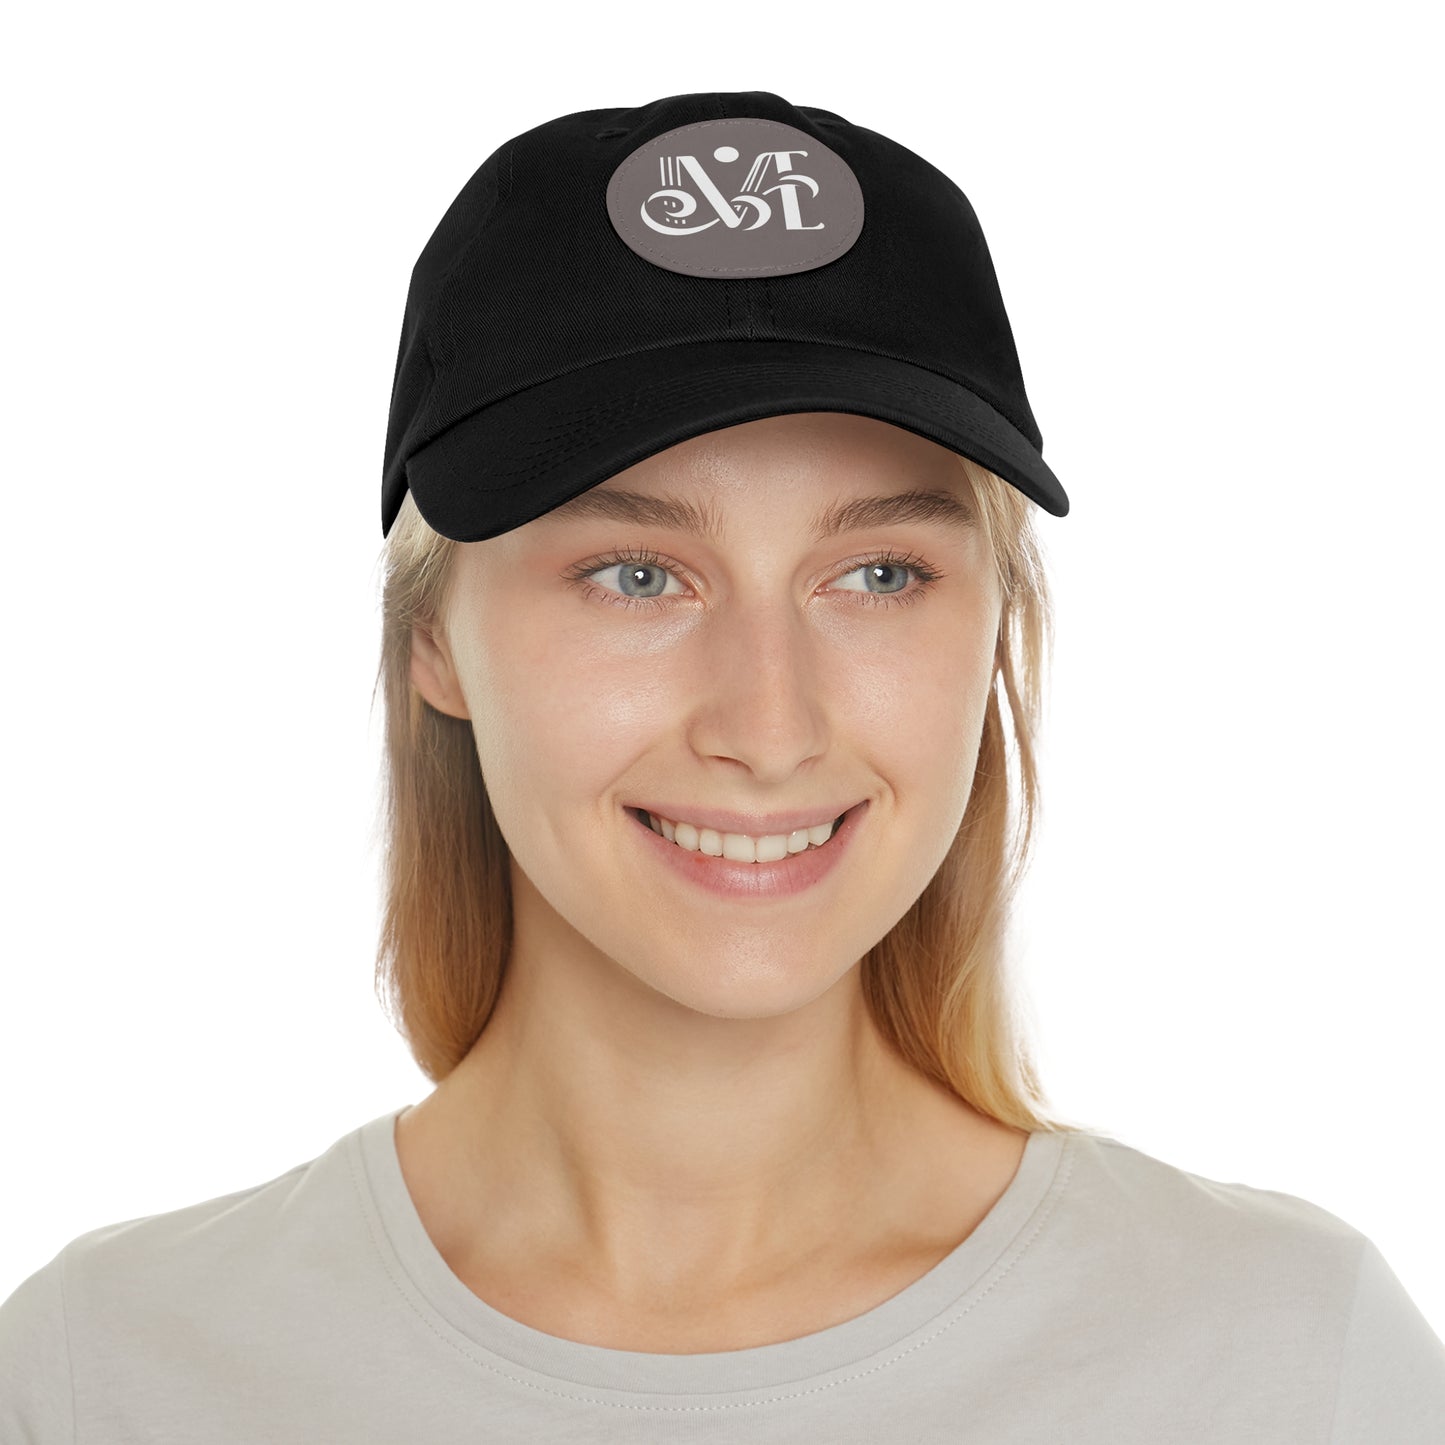 I AM ME - Authentic Self - Leather Patch Hat